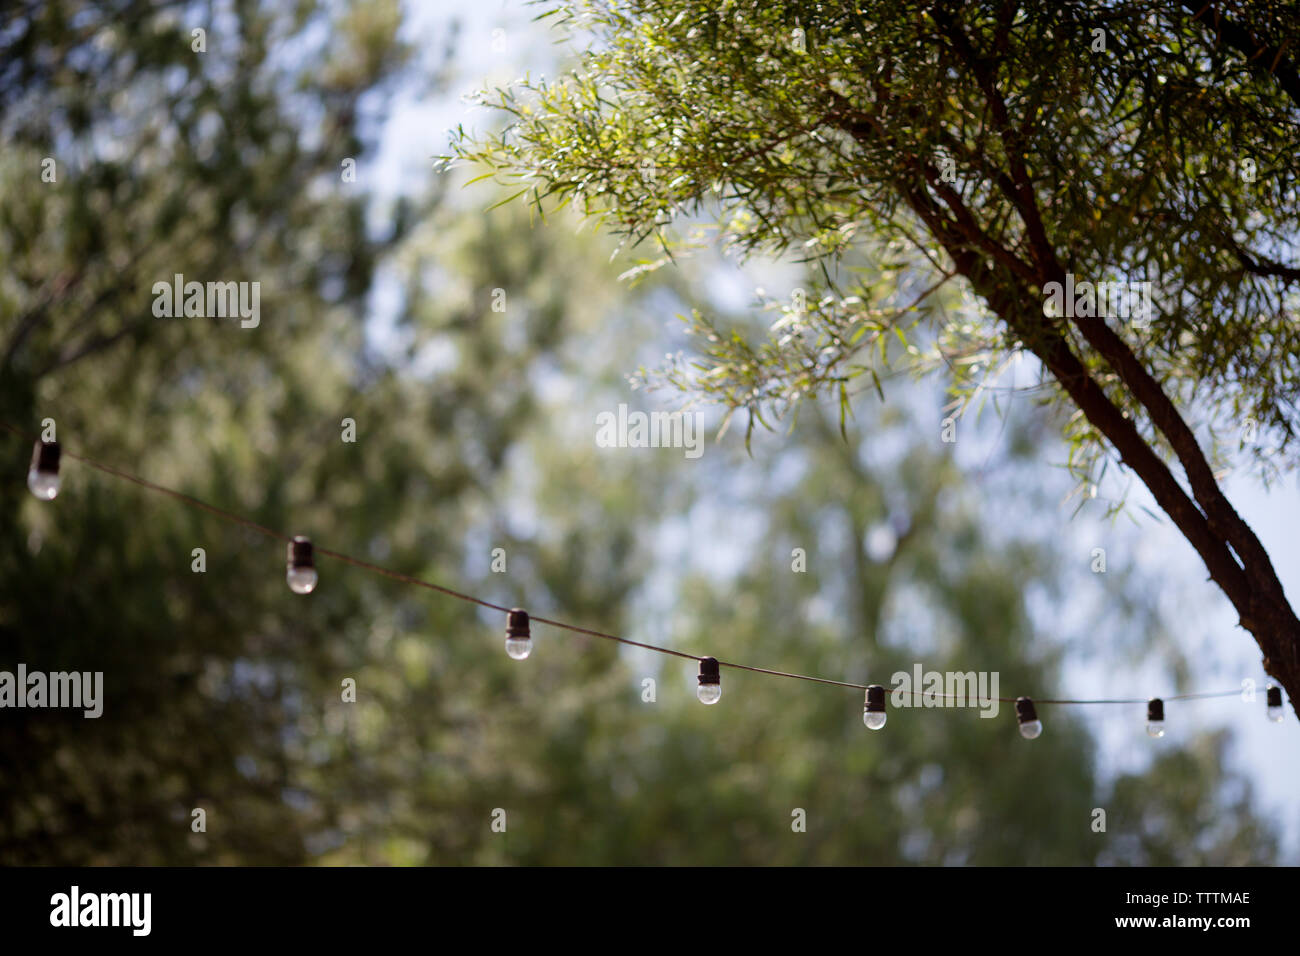 Lighting equipment hanging against branches during wedding ceremony Stock Photo